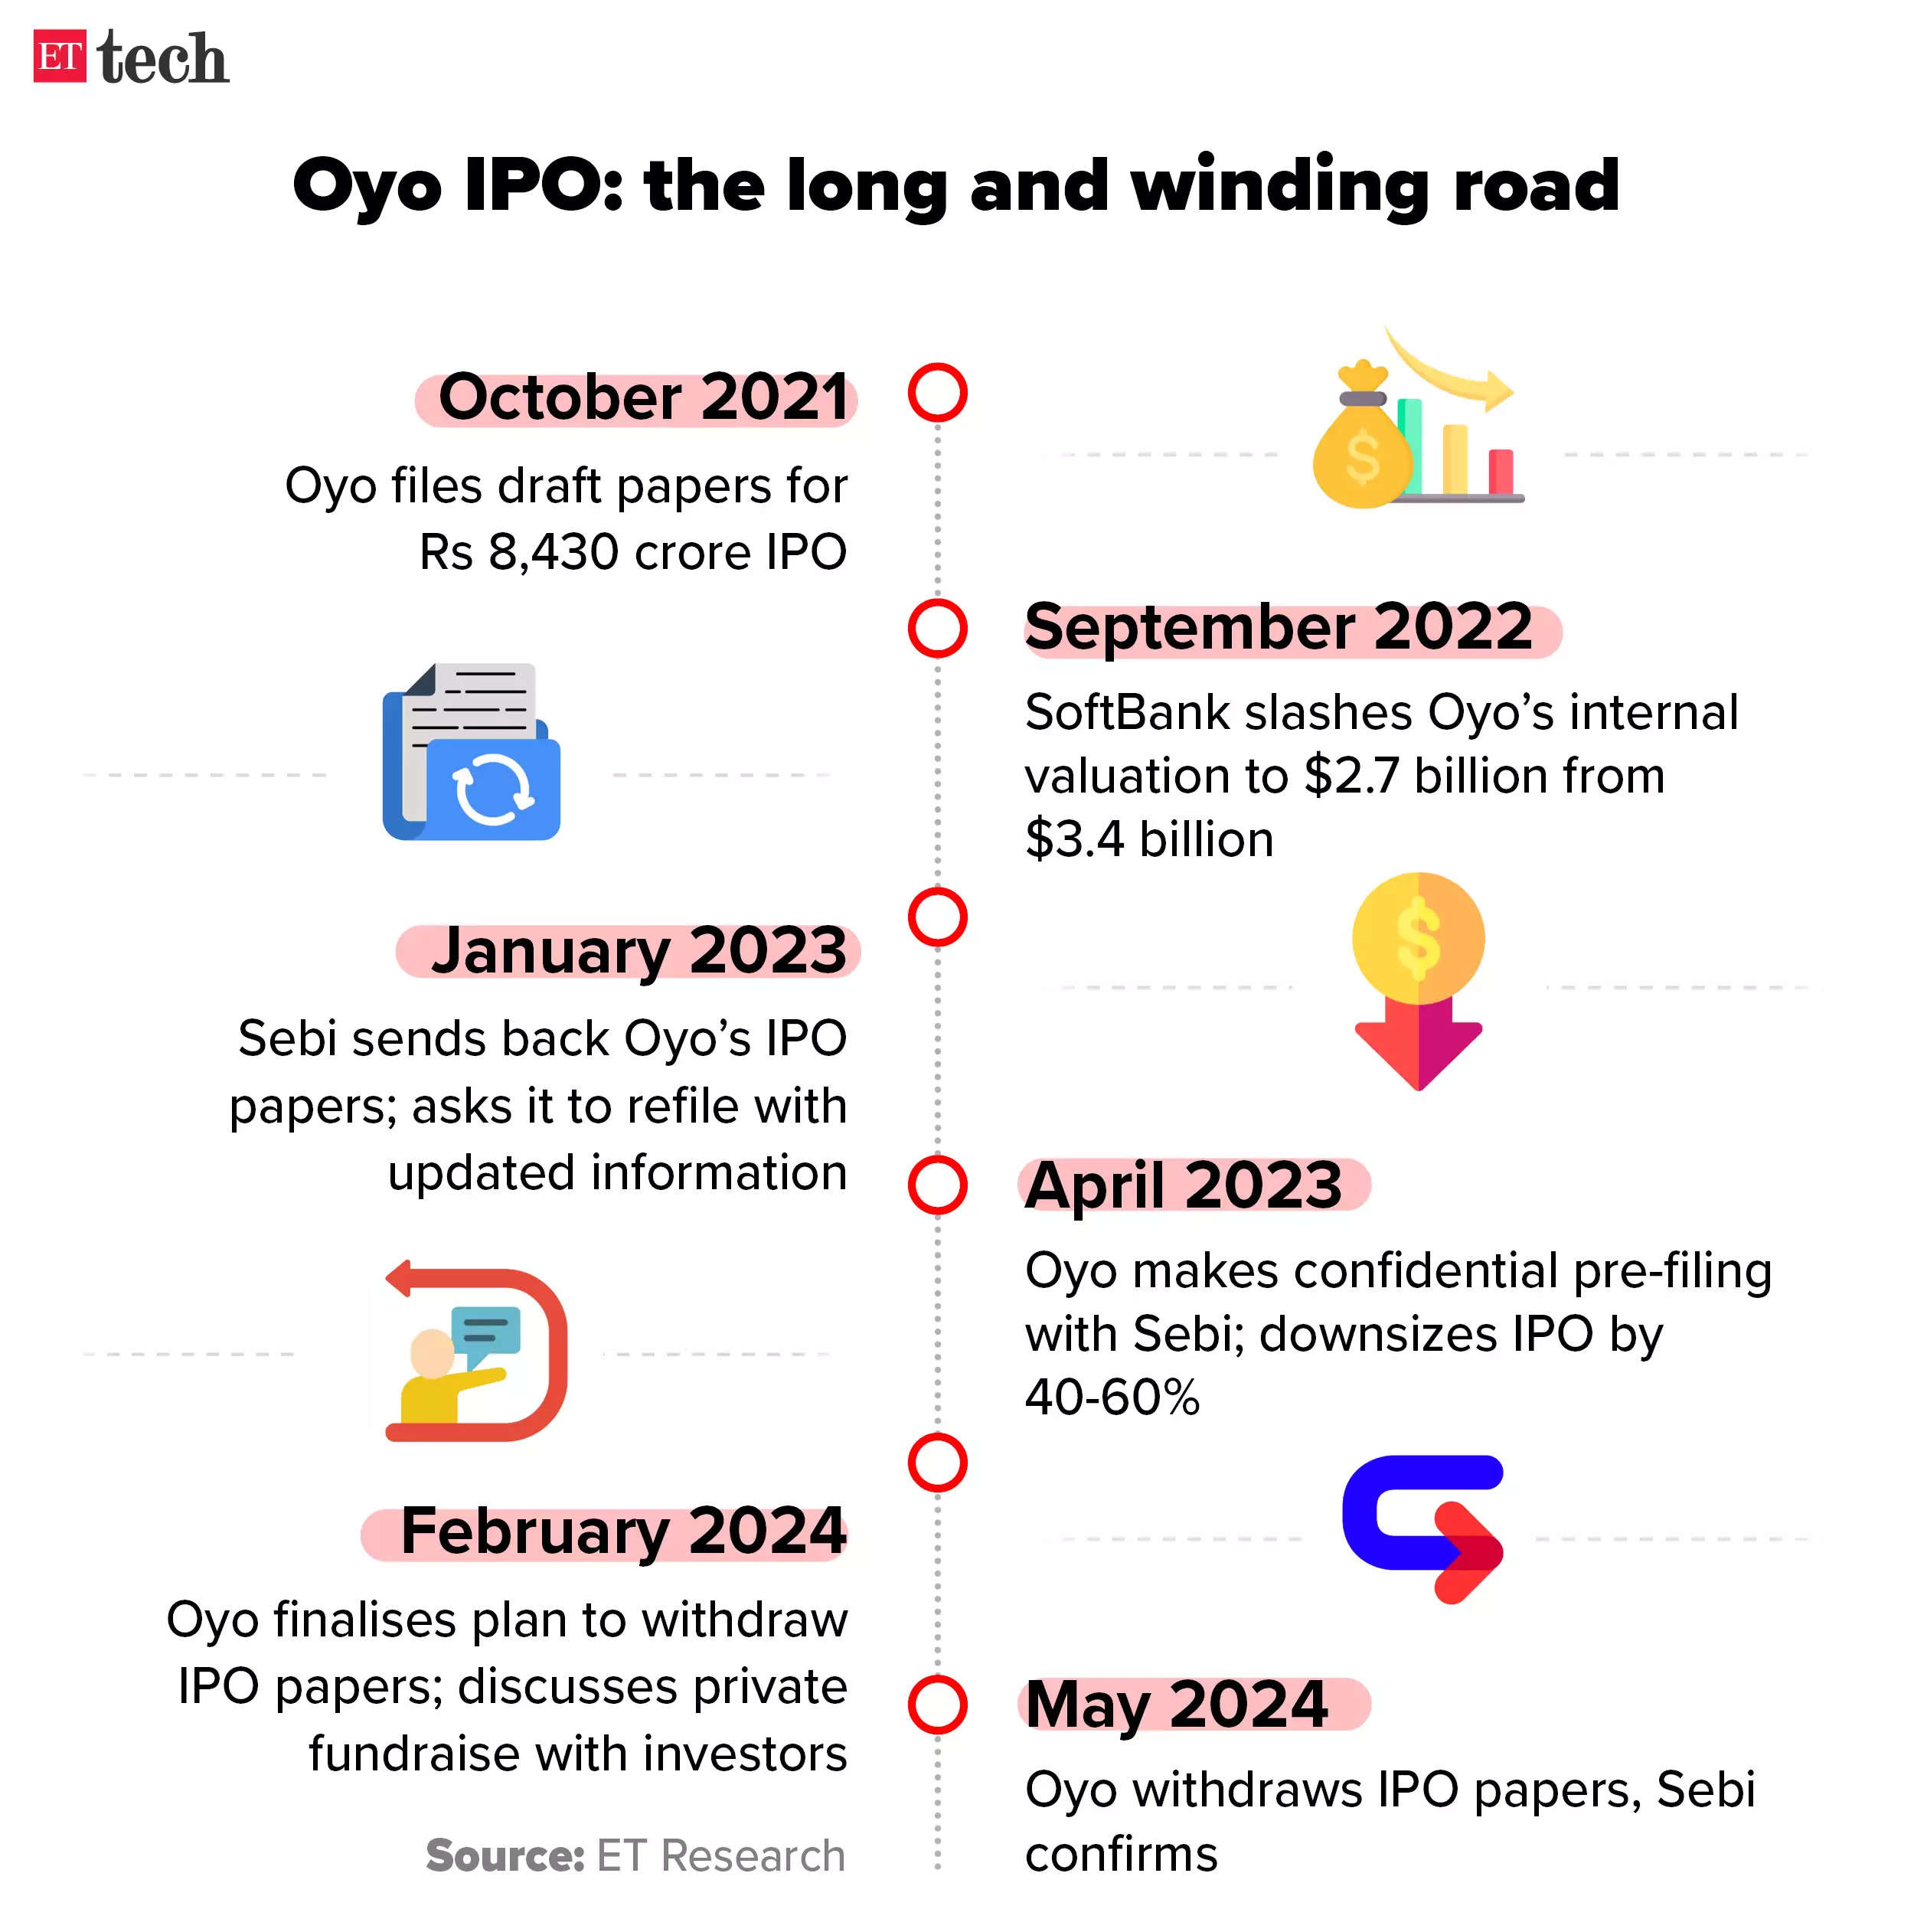 oyo-ipo-the-long-and-winding-road_timeline_may-2024_graphic_ettech.